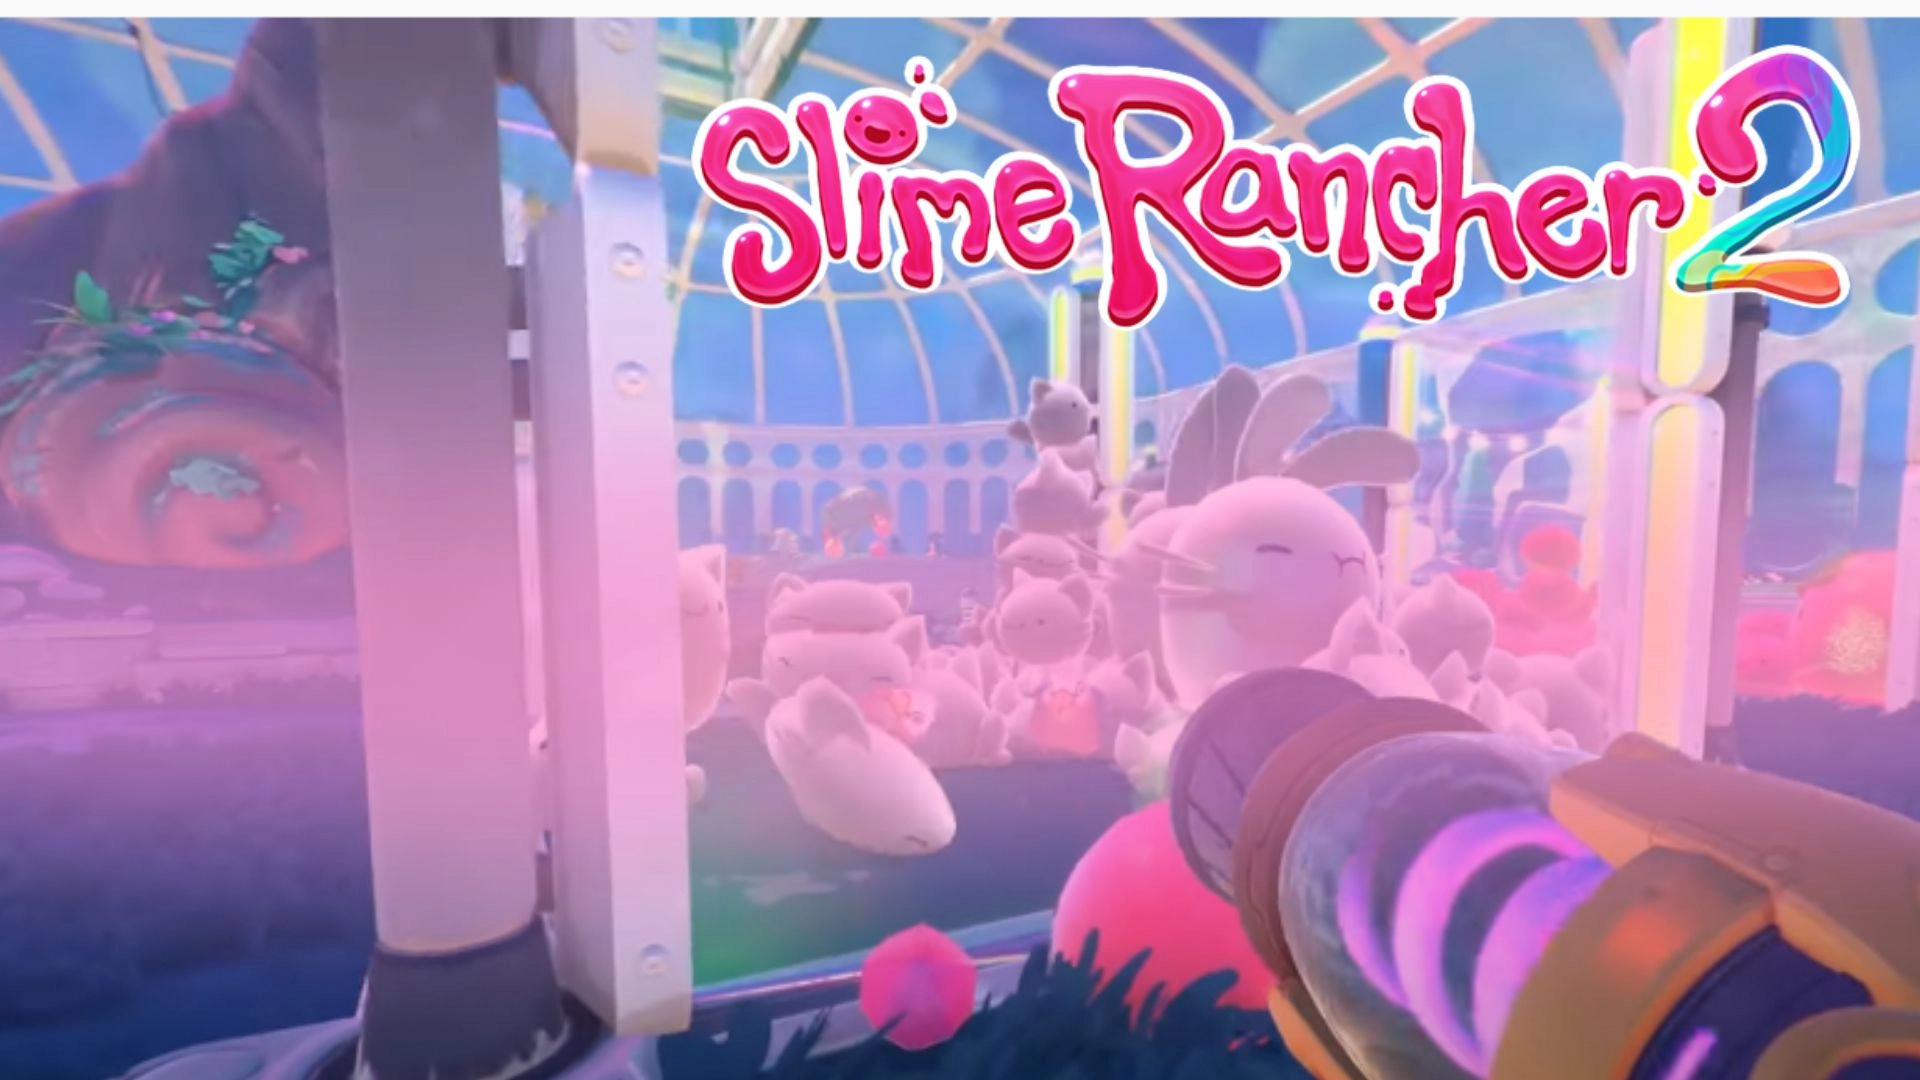 Slime Rancher 2 Parents Guide and Age Rating (2022)